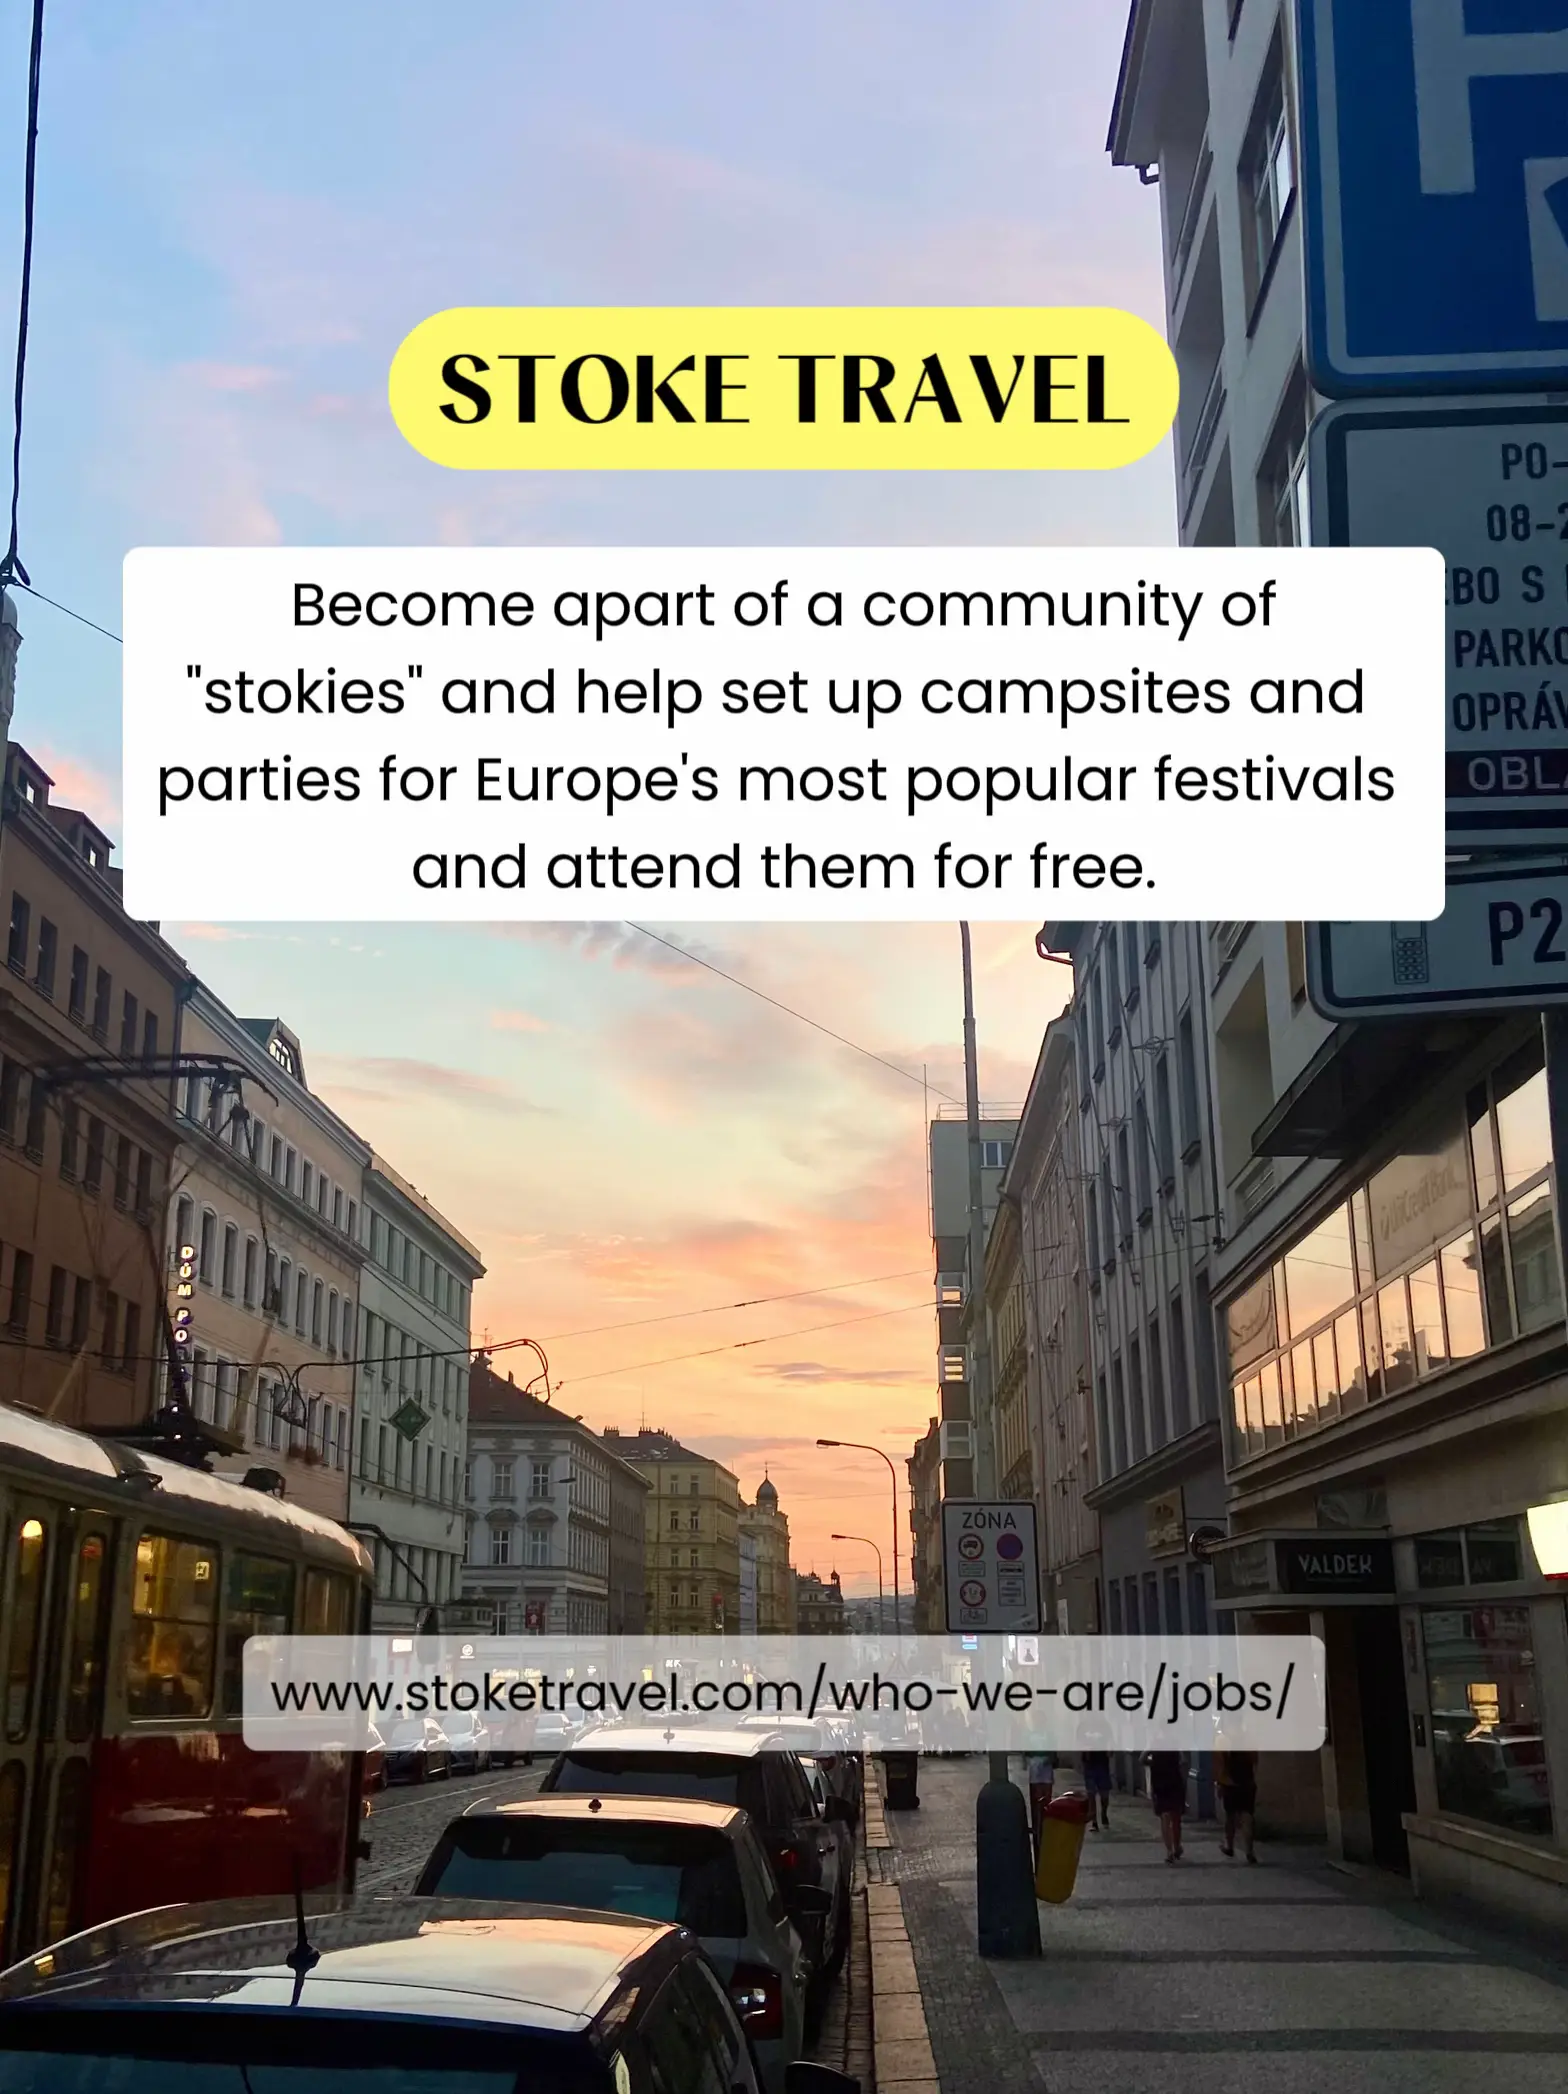  A sign that says "Become apart of a community of stokies" and help set up campsites and parties for Europe's most popular festivals and attend them for free.